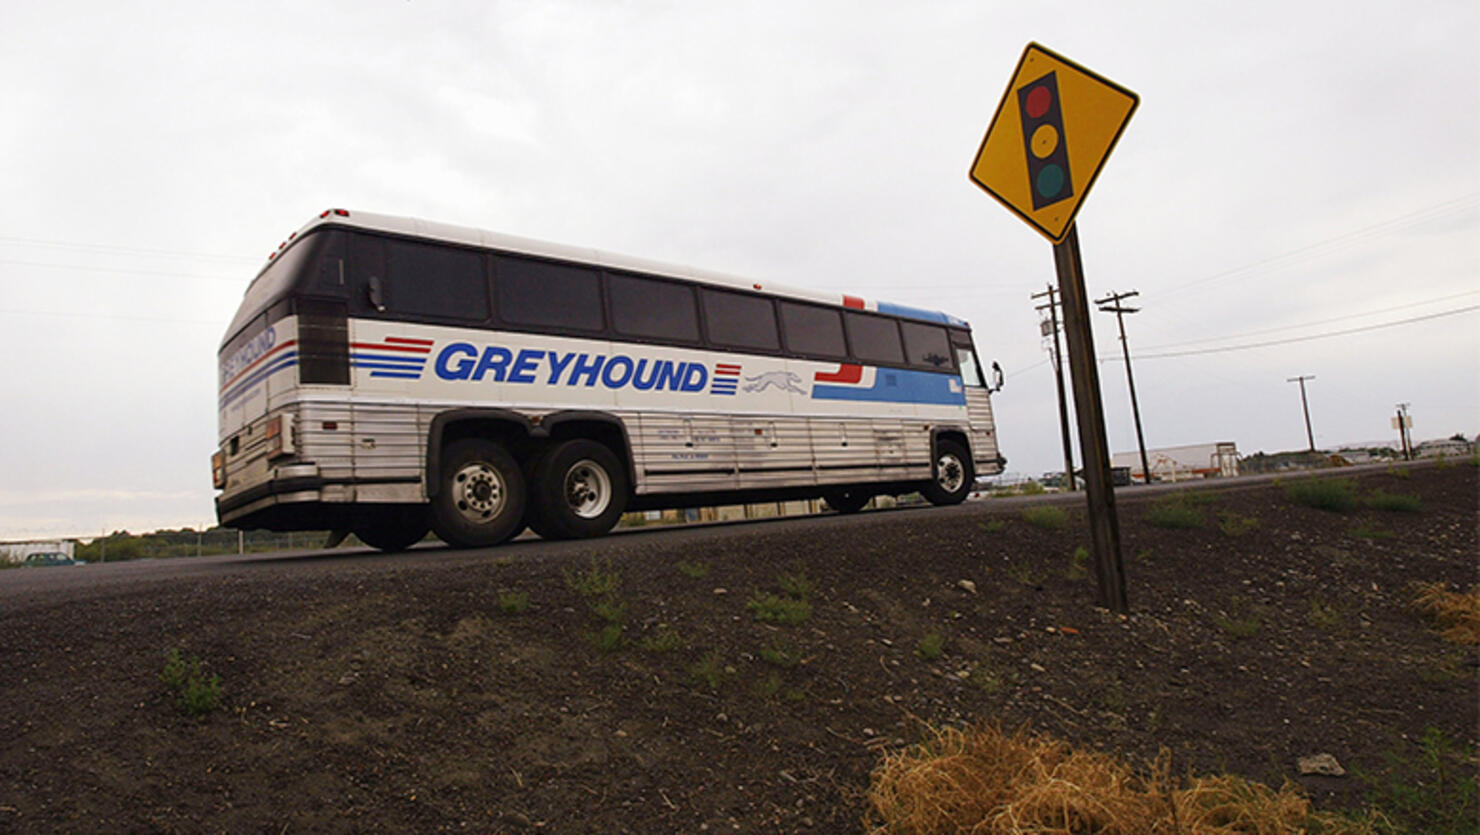 A Greyhound bus pulls out of a driveway of a diner in rural Washington state